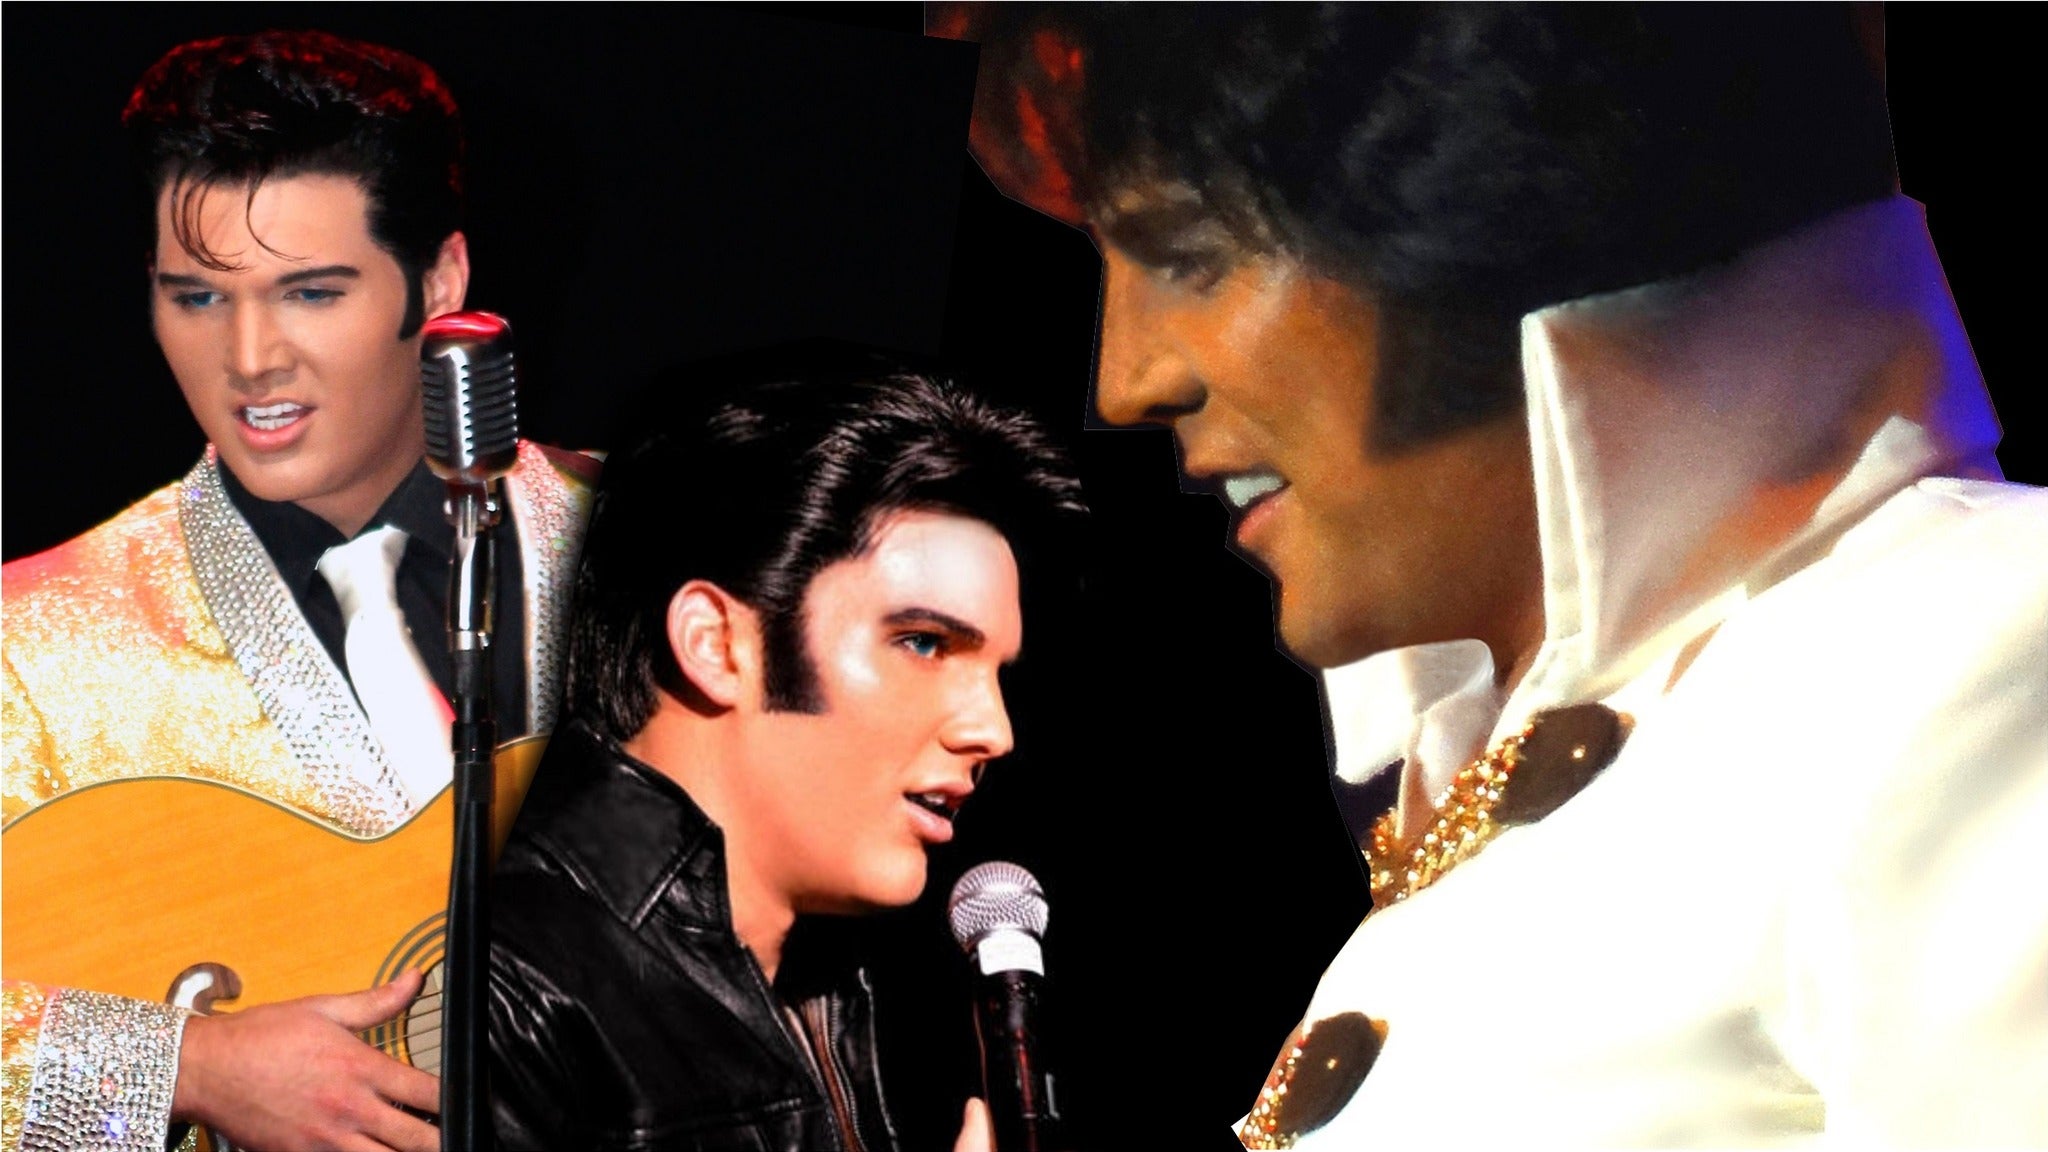 Elvis Elvis Elvis - A Tribute to the King in Tunica Resorts promo photo for Official Platinum presale offer code